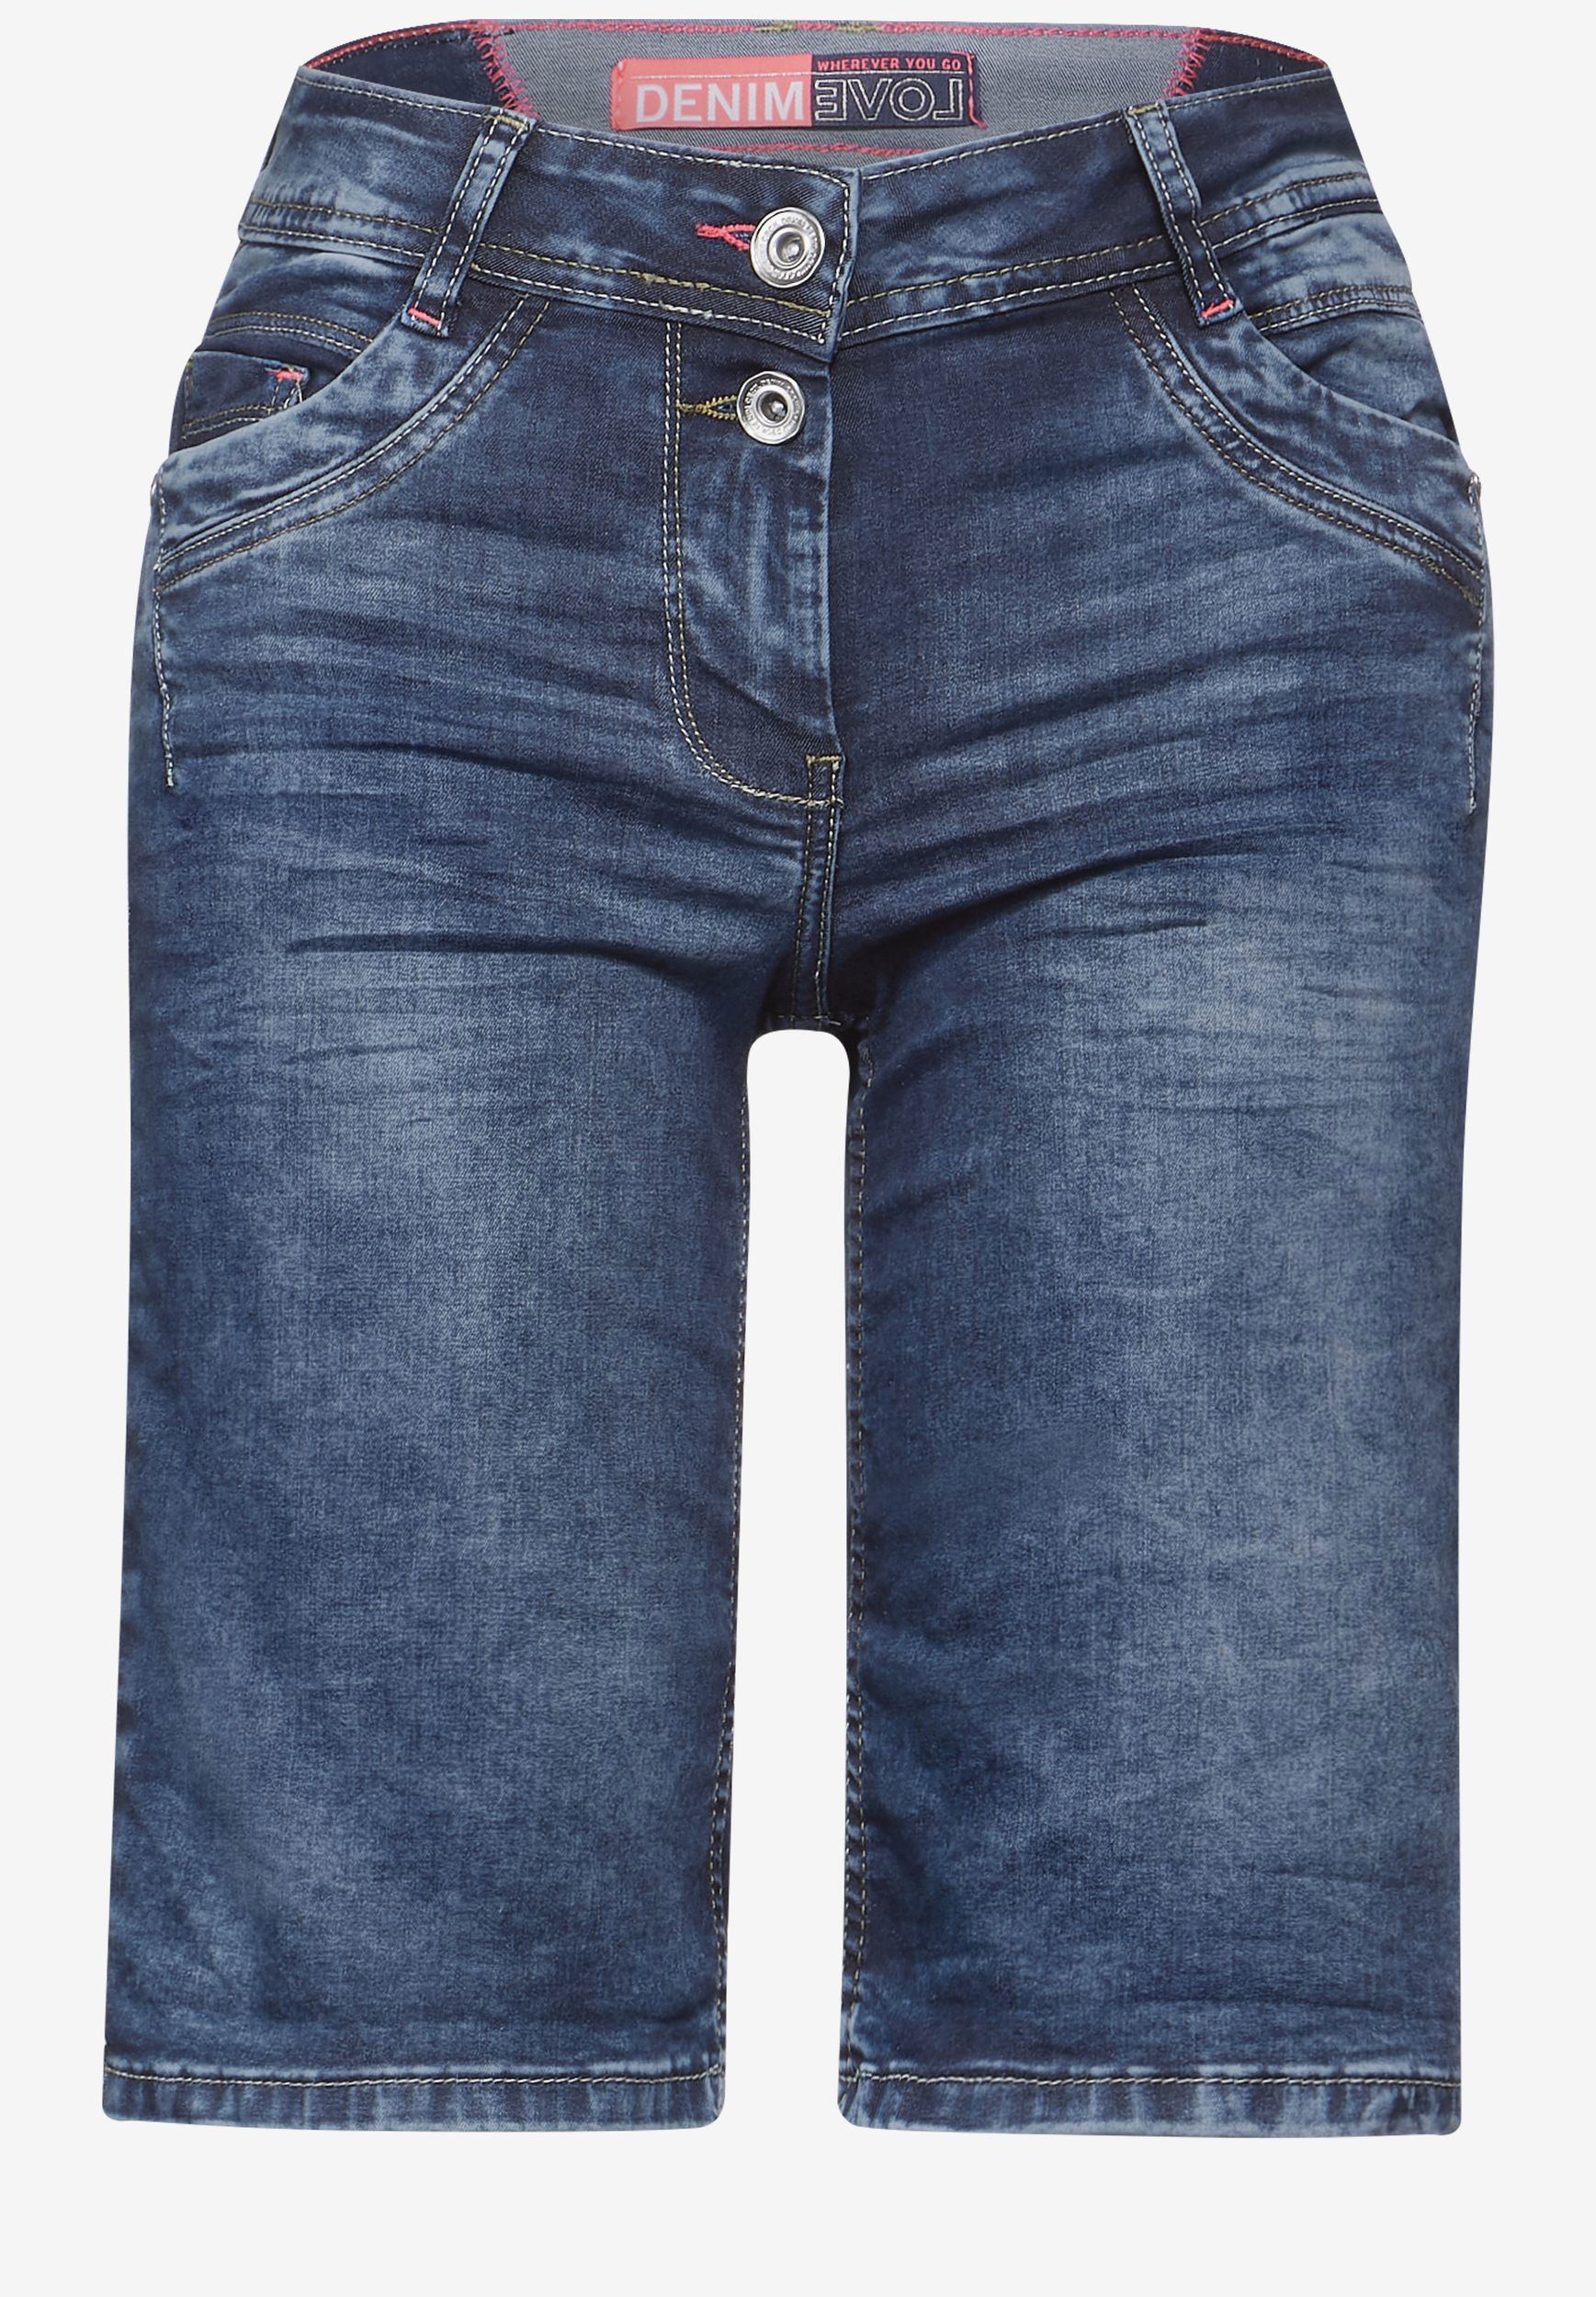 CECIL |  CECIL Jeansshorts  | 29 | mid blue used wash